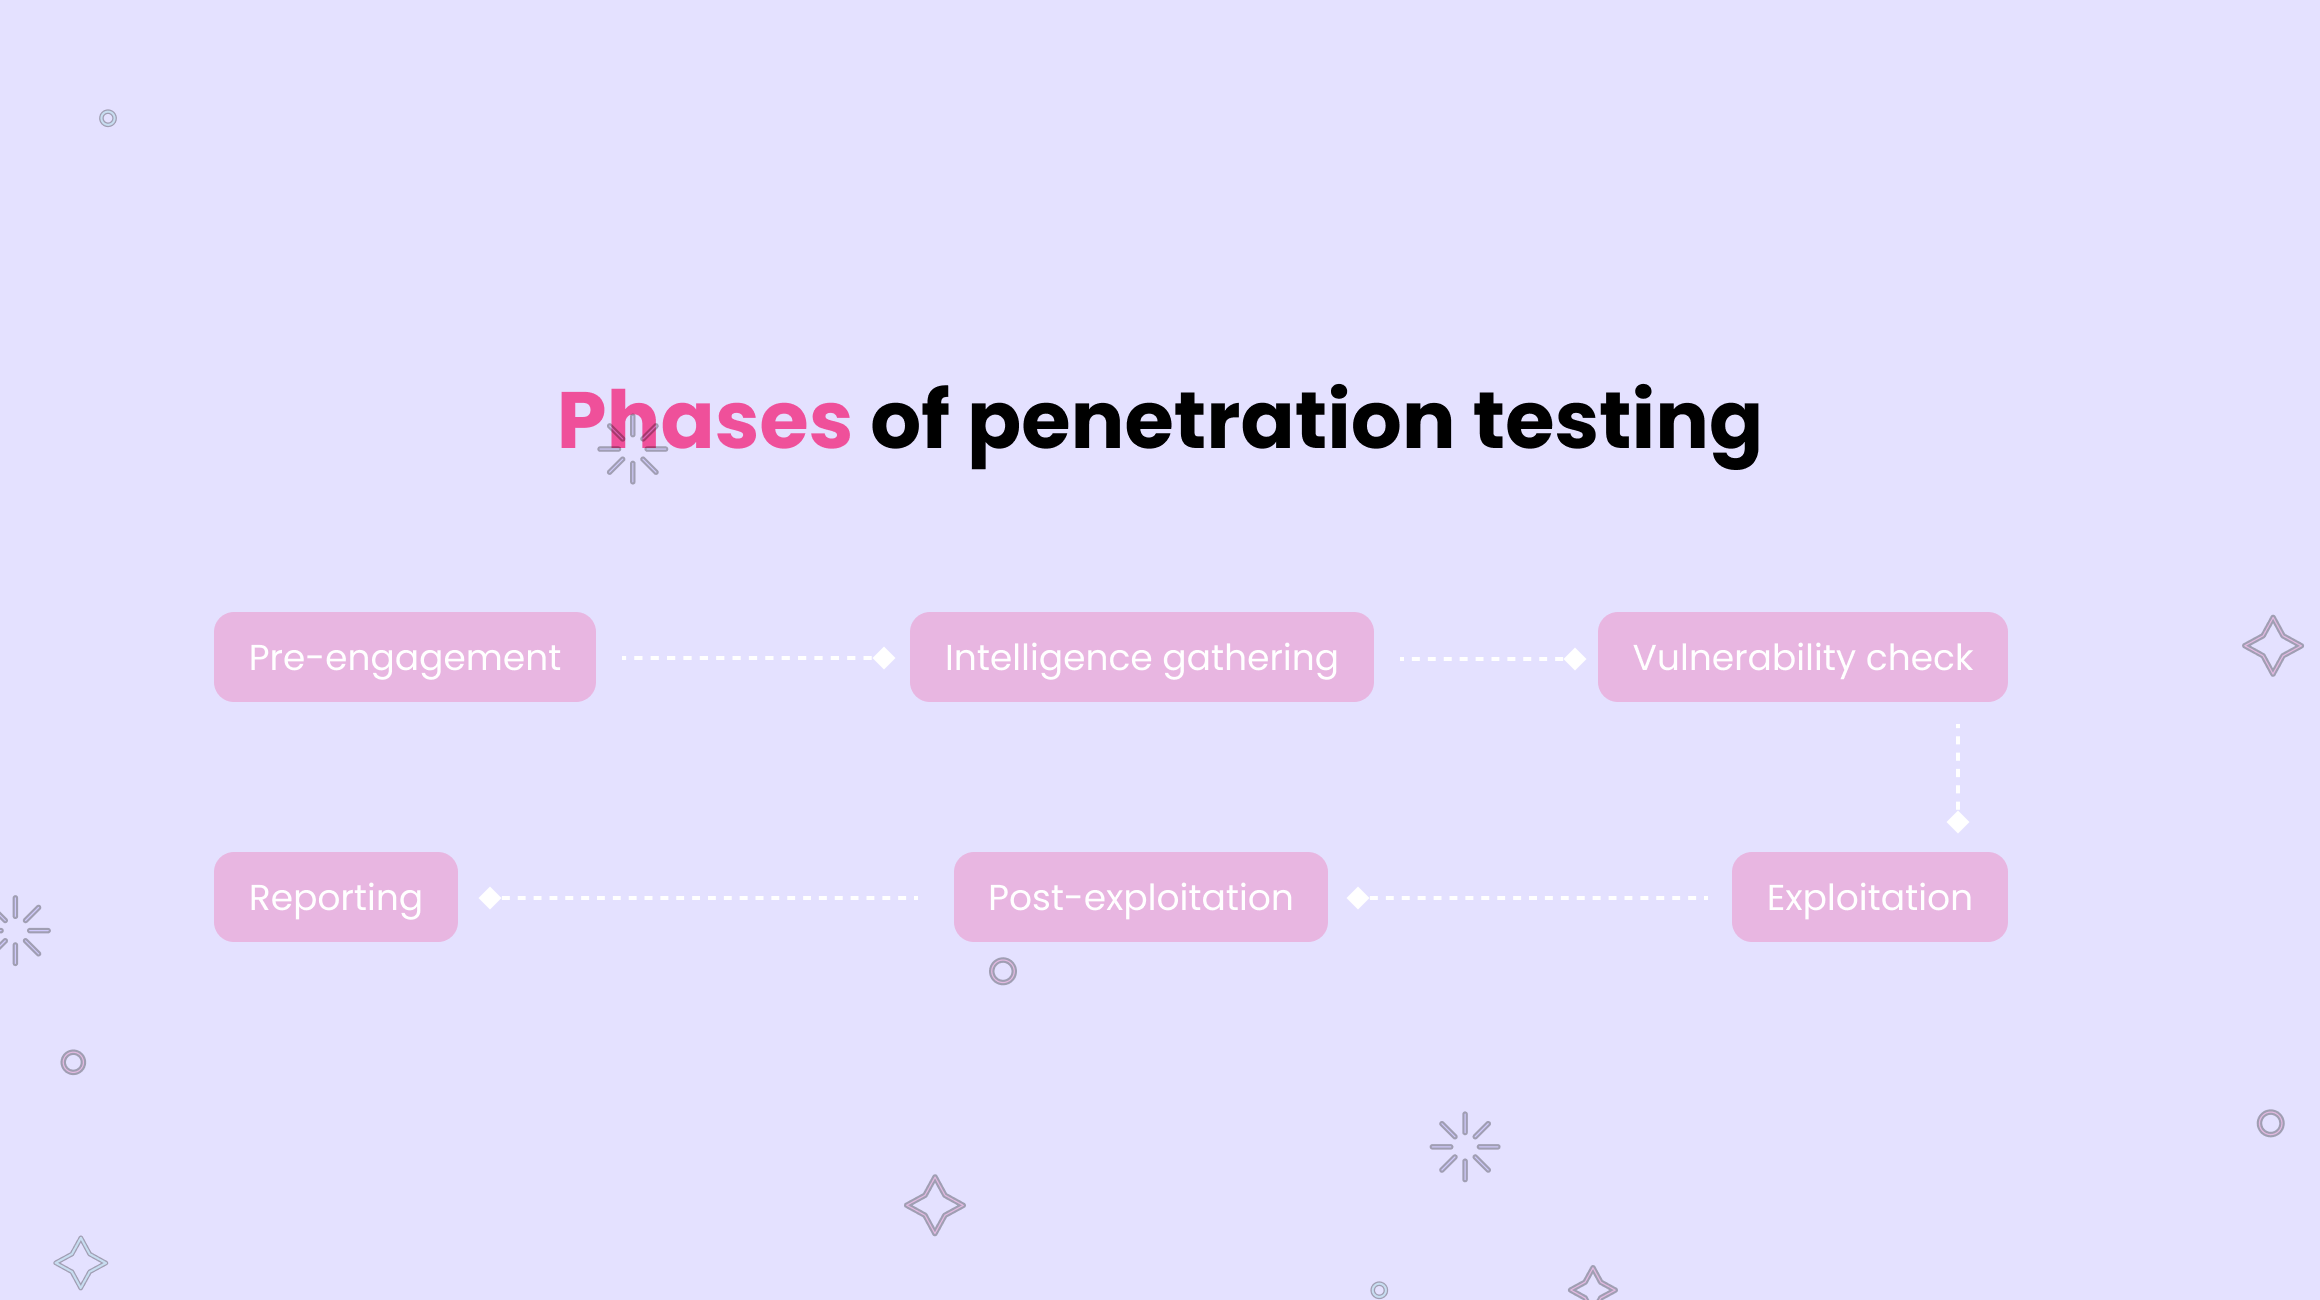 Phases of Pen Testing